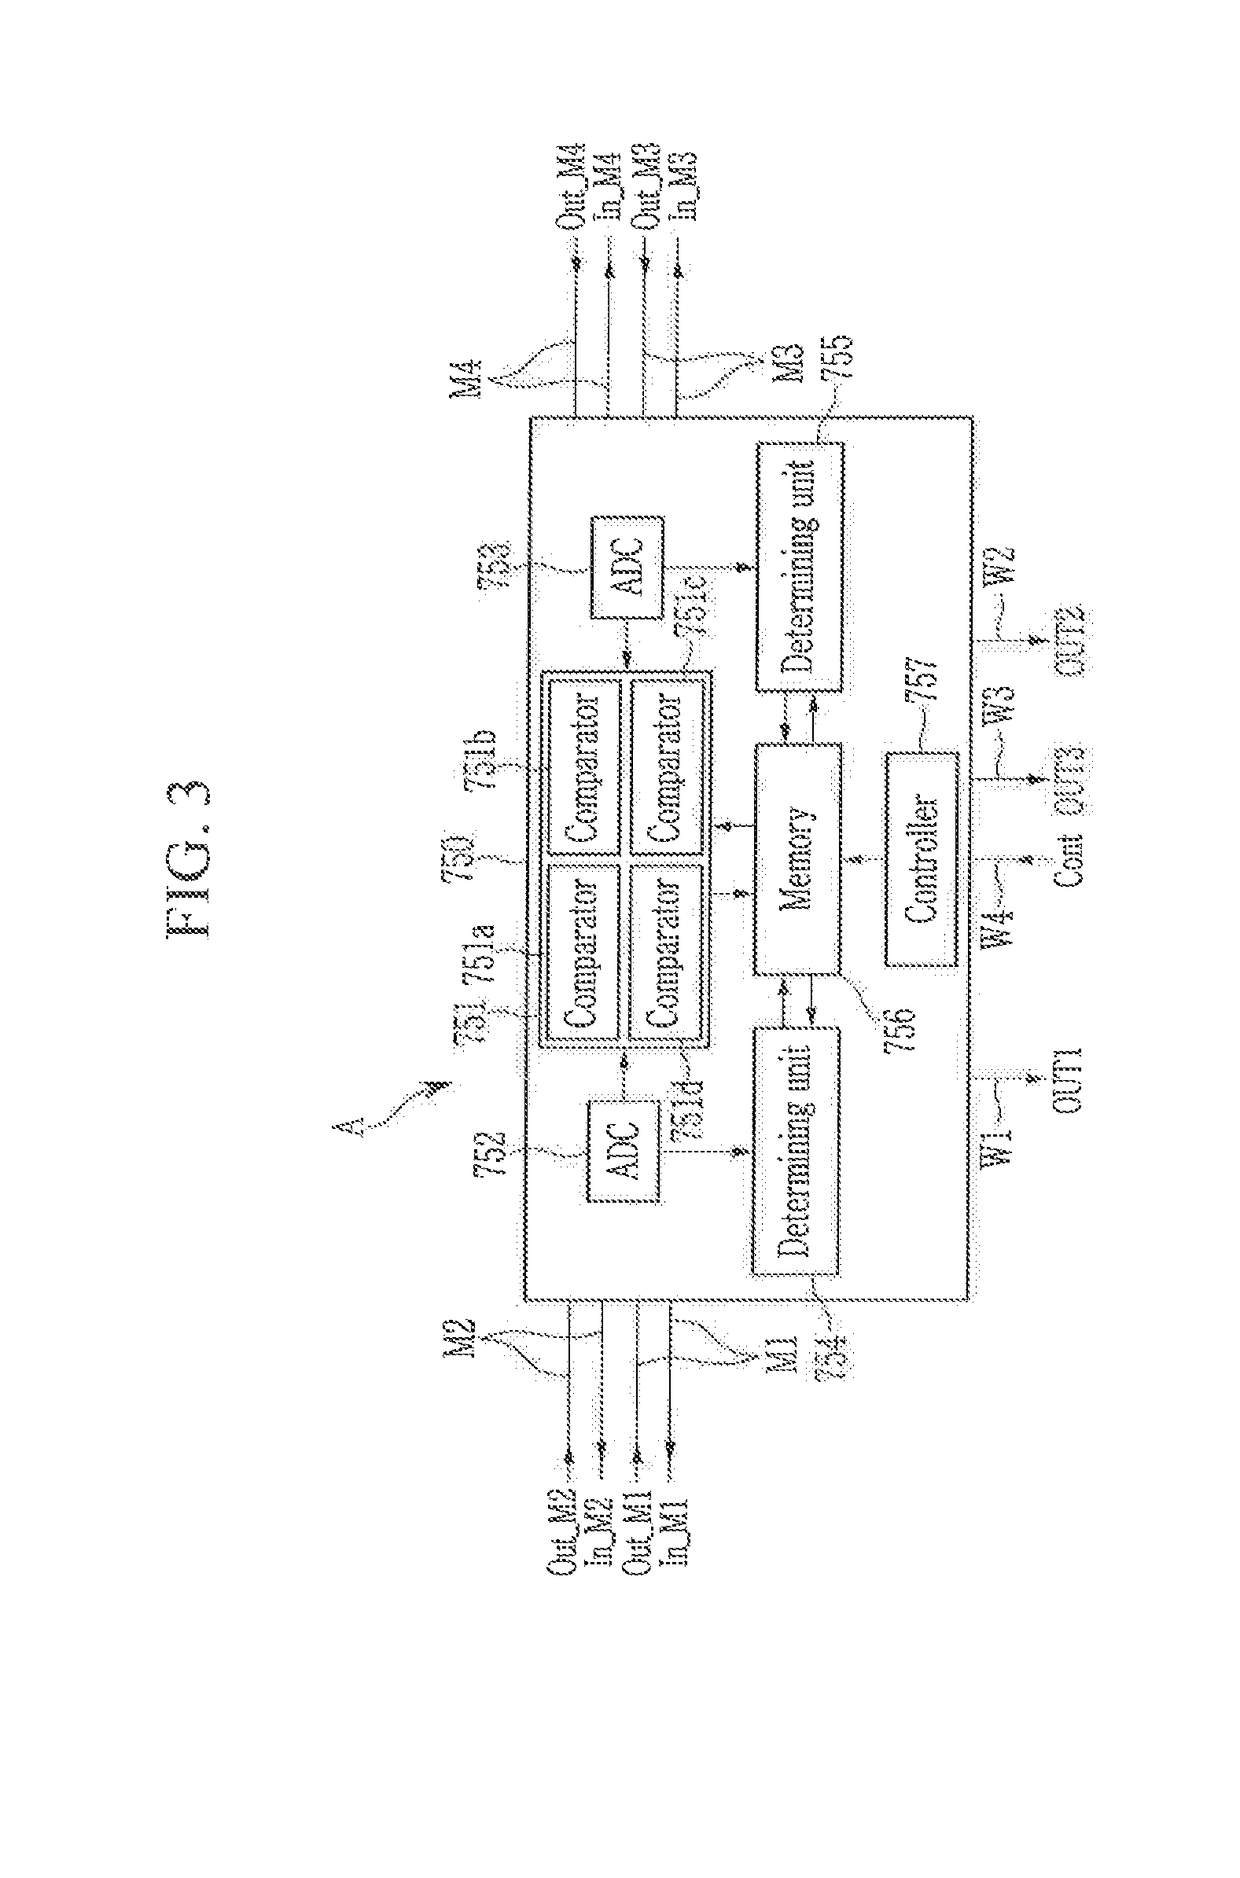 Display device and inspecting method therefor